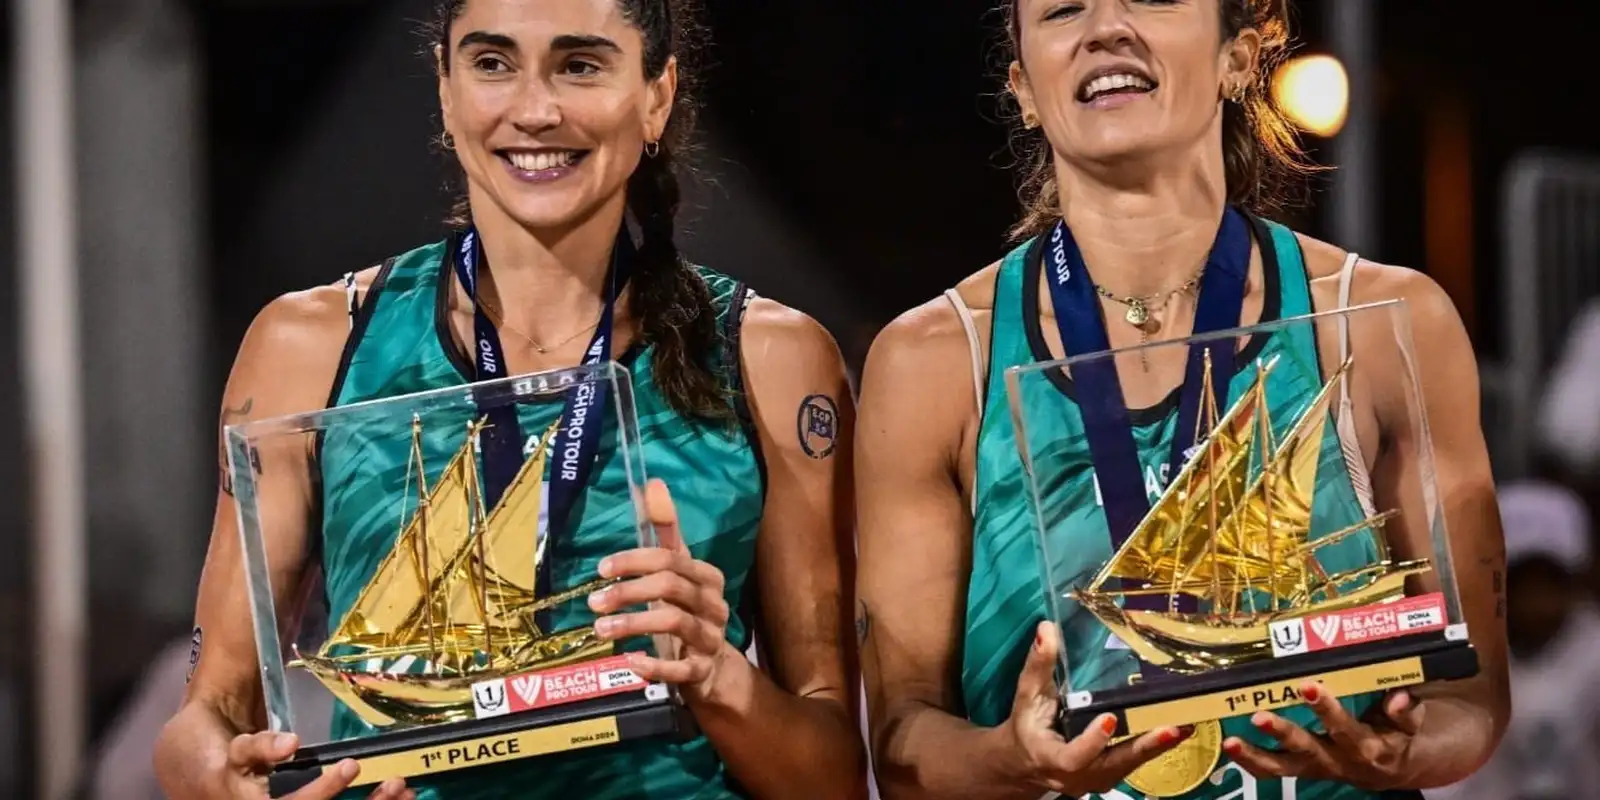 Bárbara and Carol are champions of the Doha stage and are getting closer to Paris